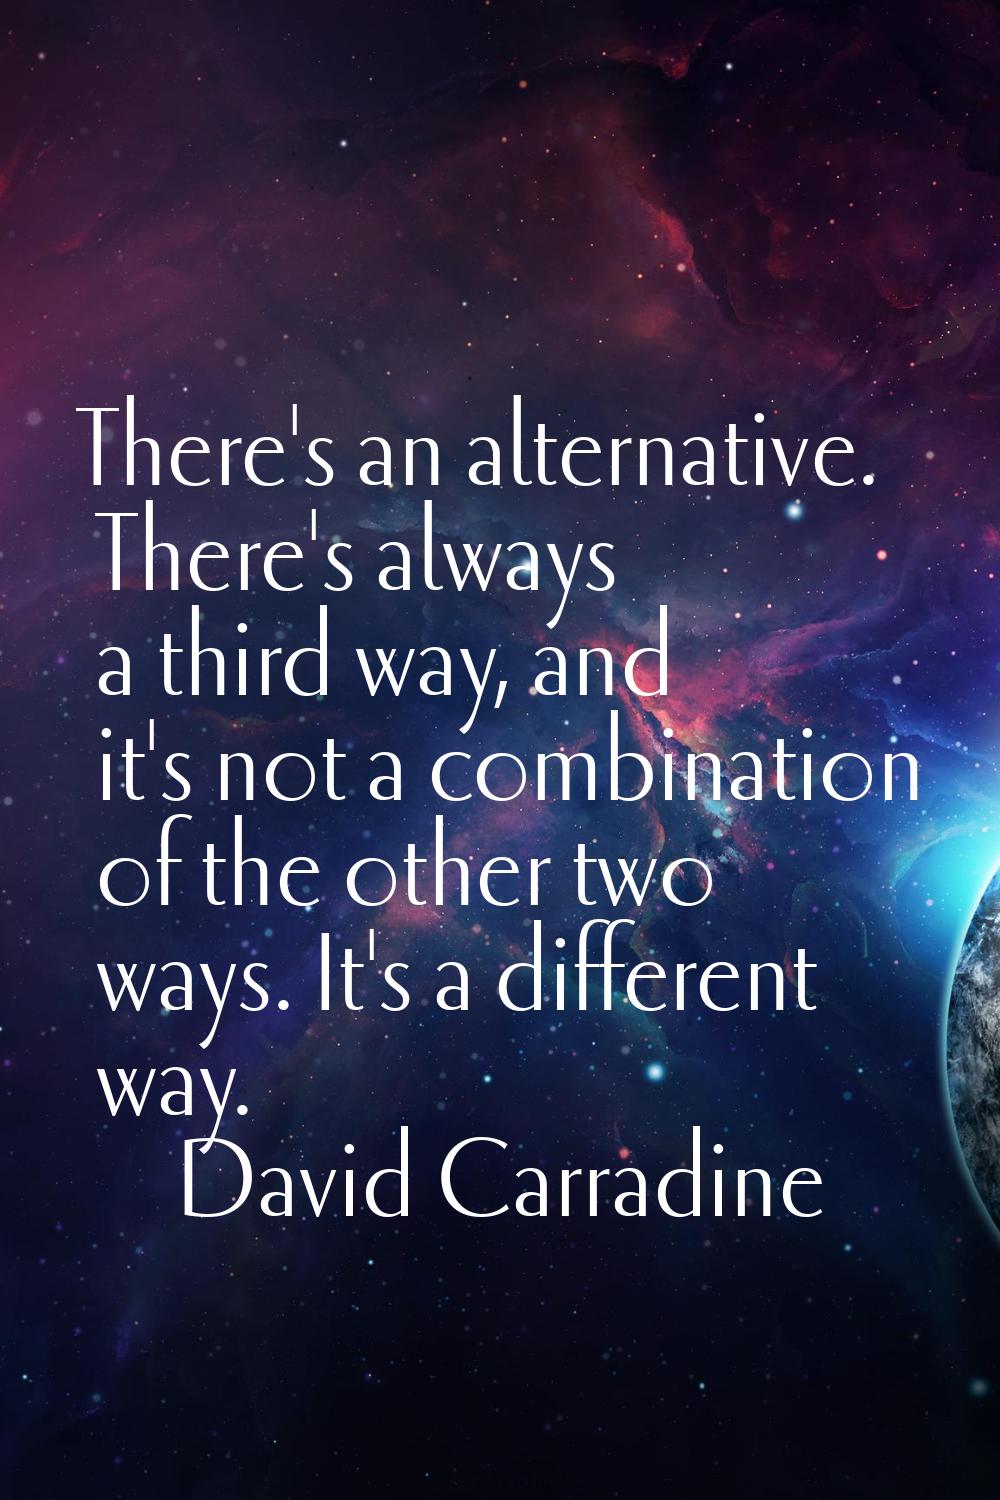 There's an alternative. There's always a third way, and it's not a combination of the other two way